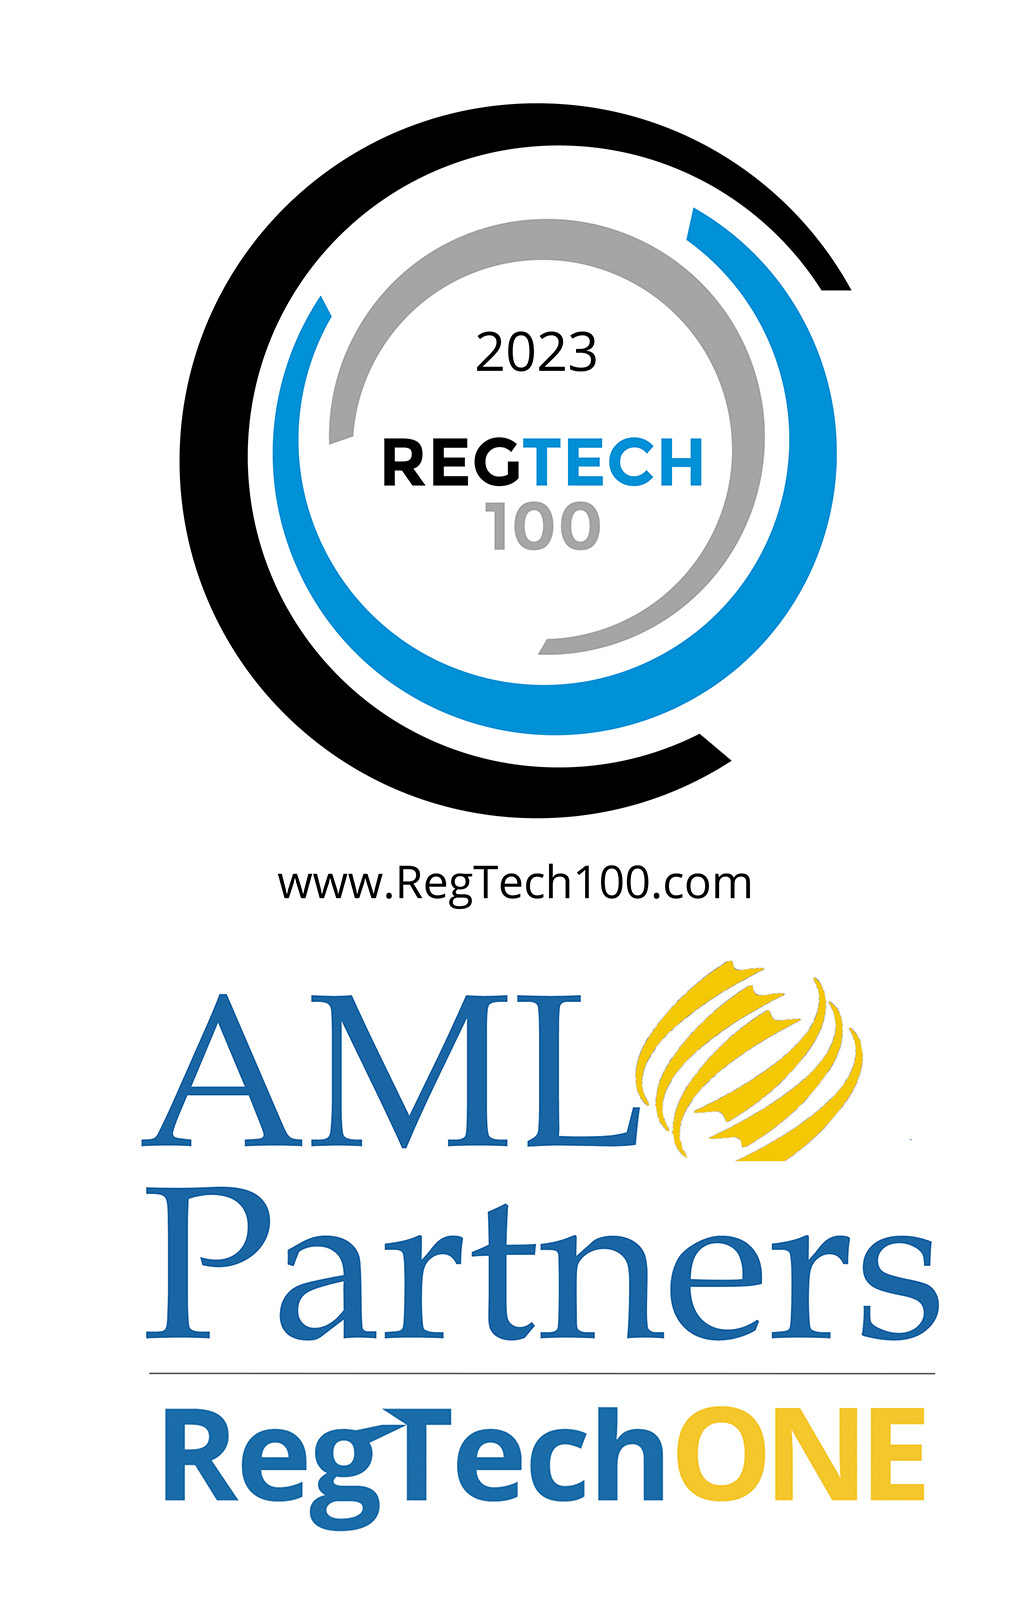 RegTech100 2023 for AML Partners and RegTechONE platform. Software for AML solutions, KYC software, KYC solutions, AI in AML, eKYC Golden Record.